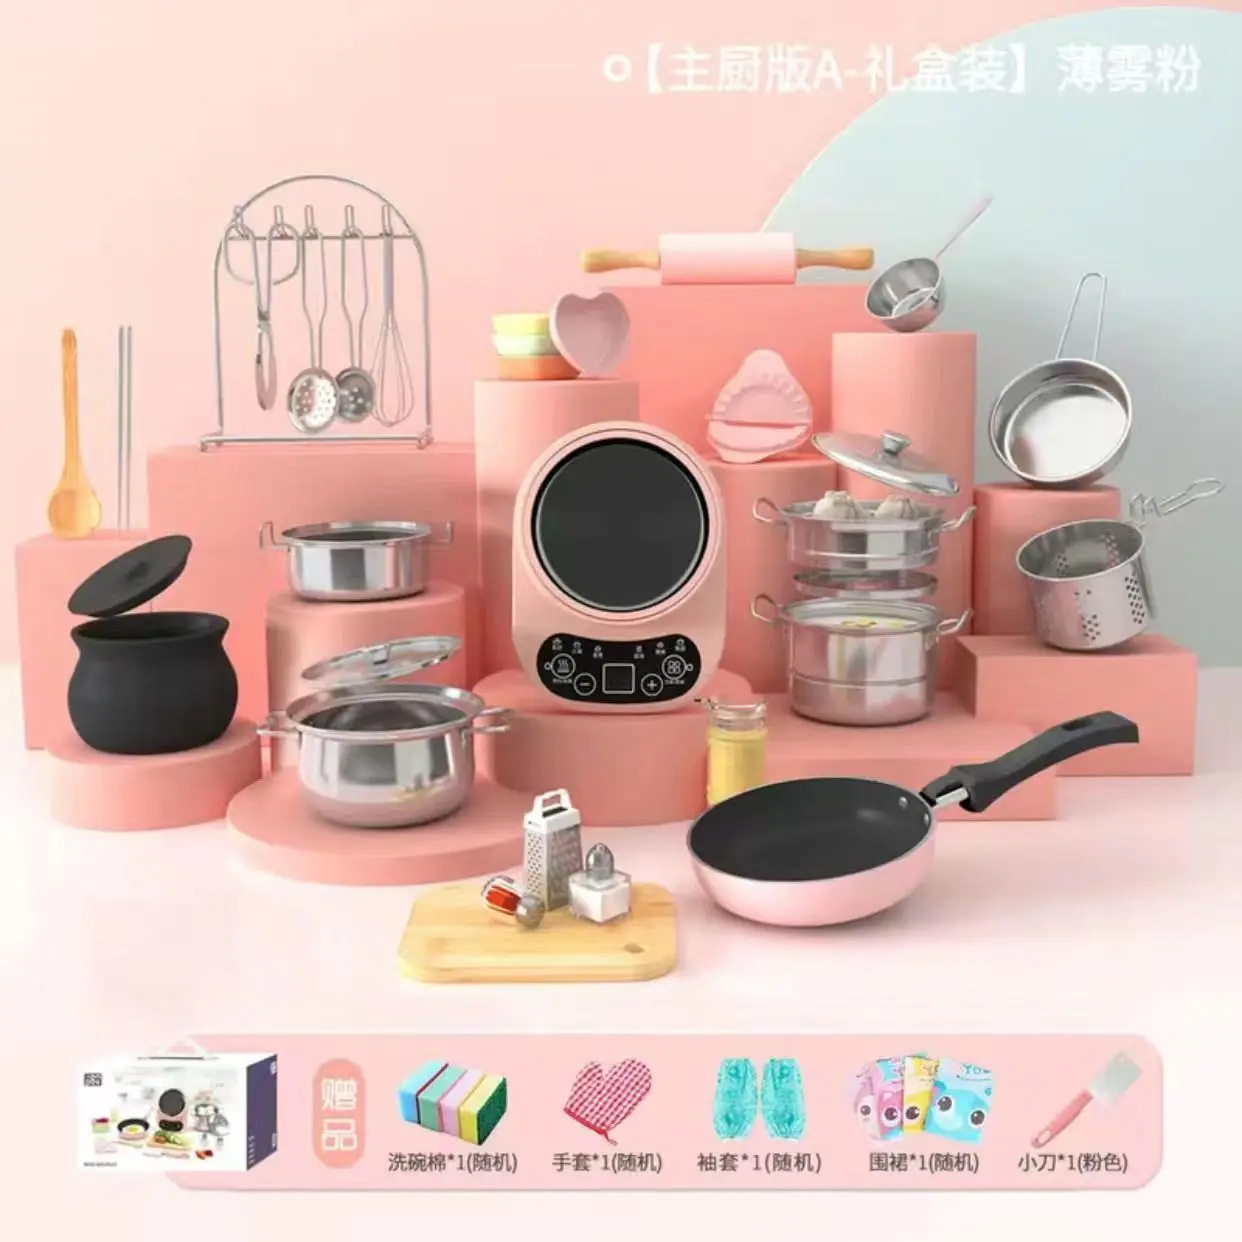 fun-simulation-kitchen-toys-real-cooking-small-kitchen-utensils-kids-cooking-interest-development-educational-puzzle-toys